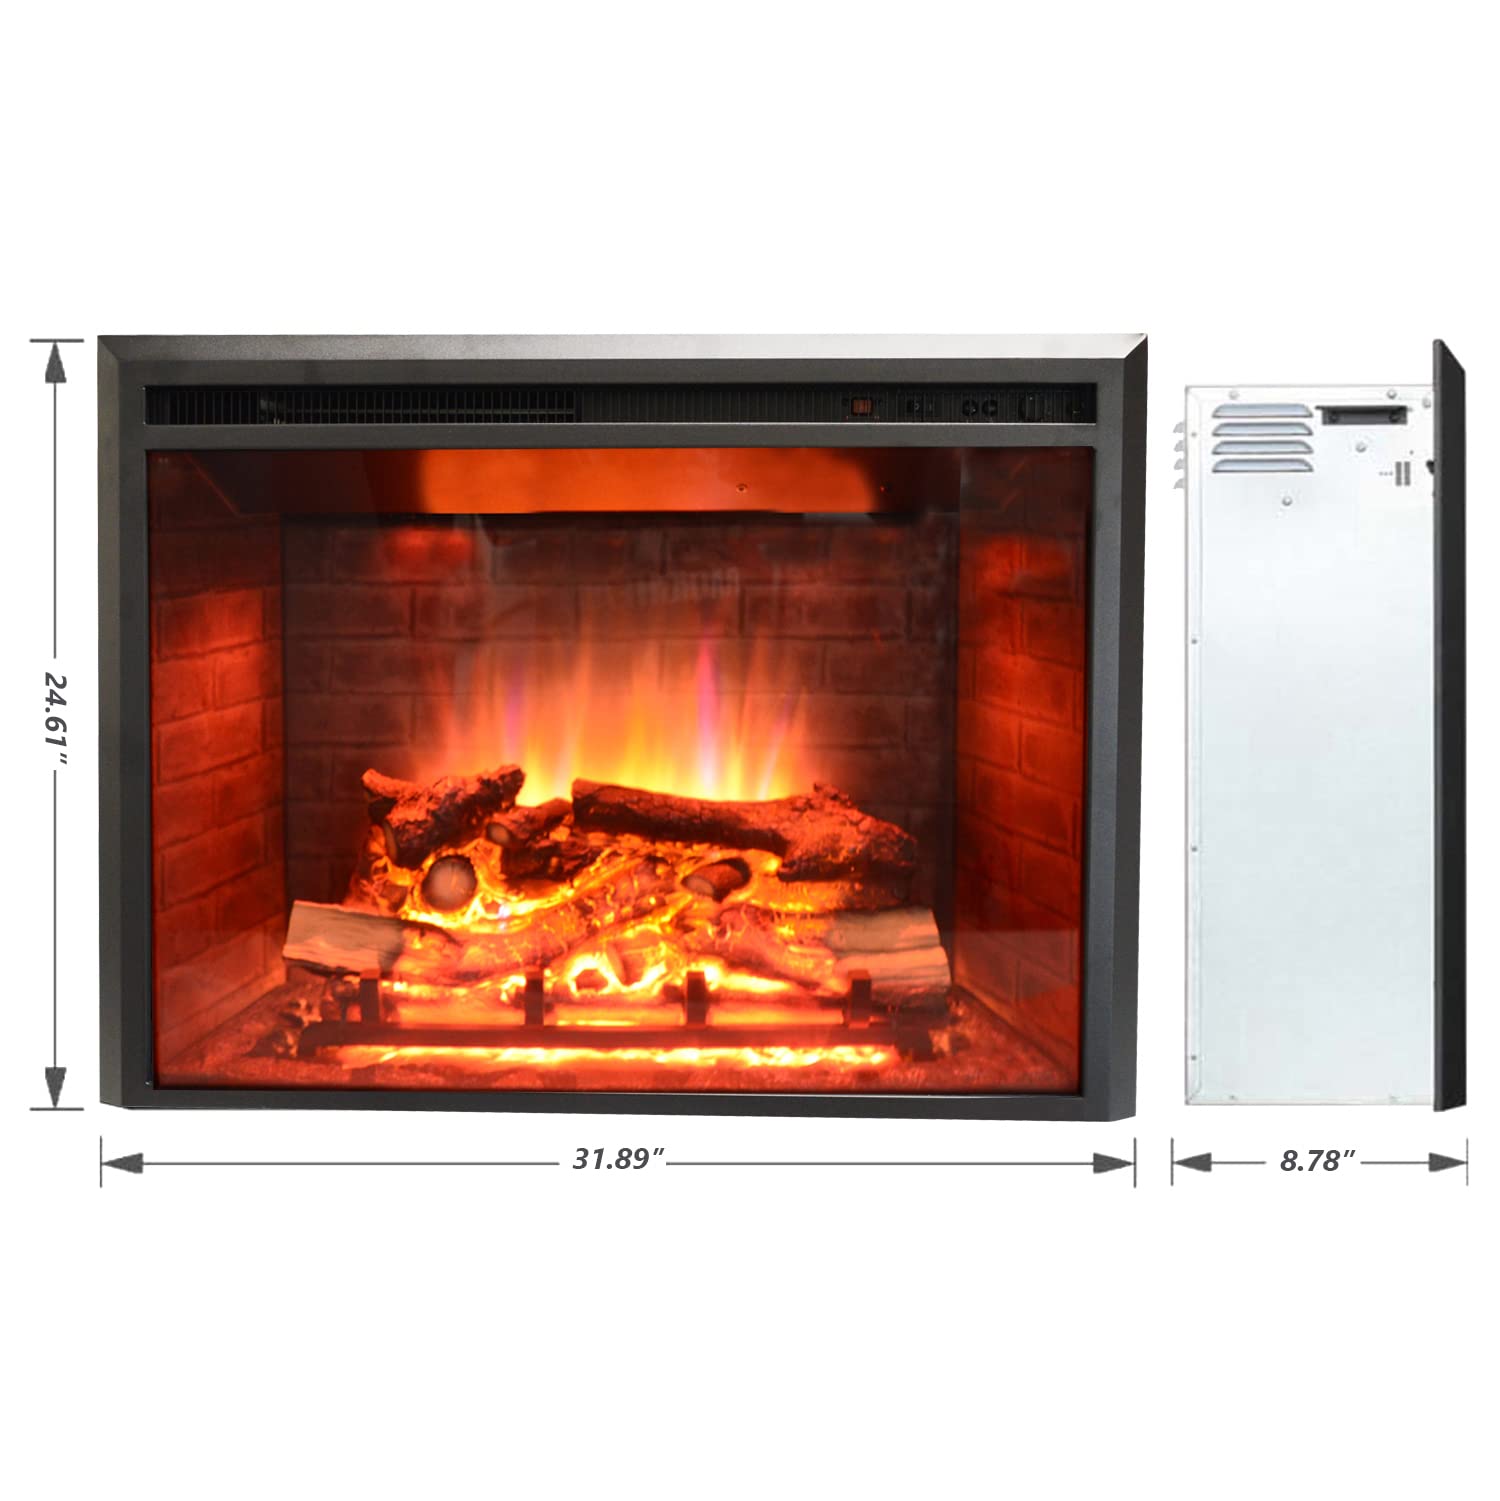 32 inch Electric Fireplace Insert, Heater, Recessed Mounted with Weathered Concrete Interior, 750/1500W, Black